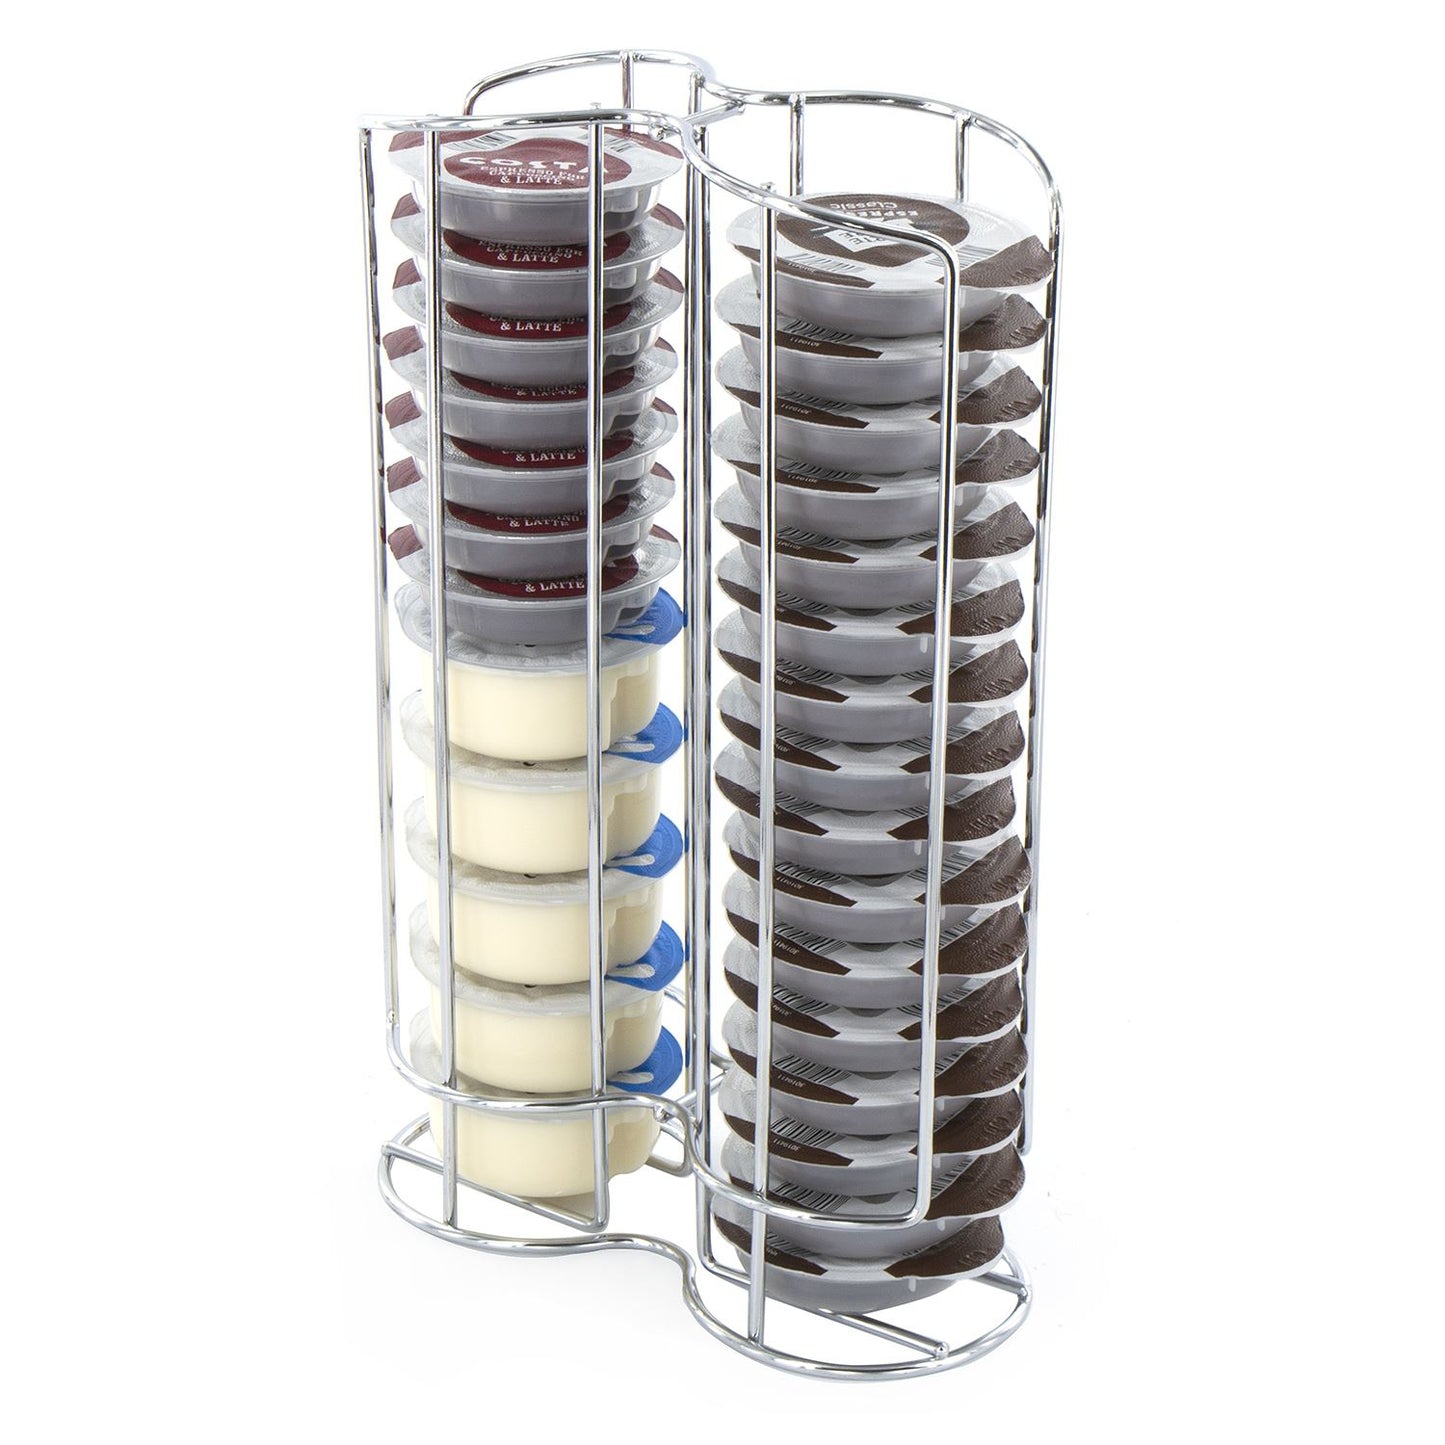 Keep Your Coffee Pods Organized with Capsule Pod Holder